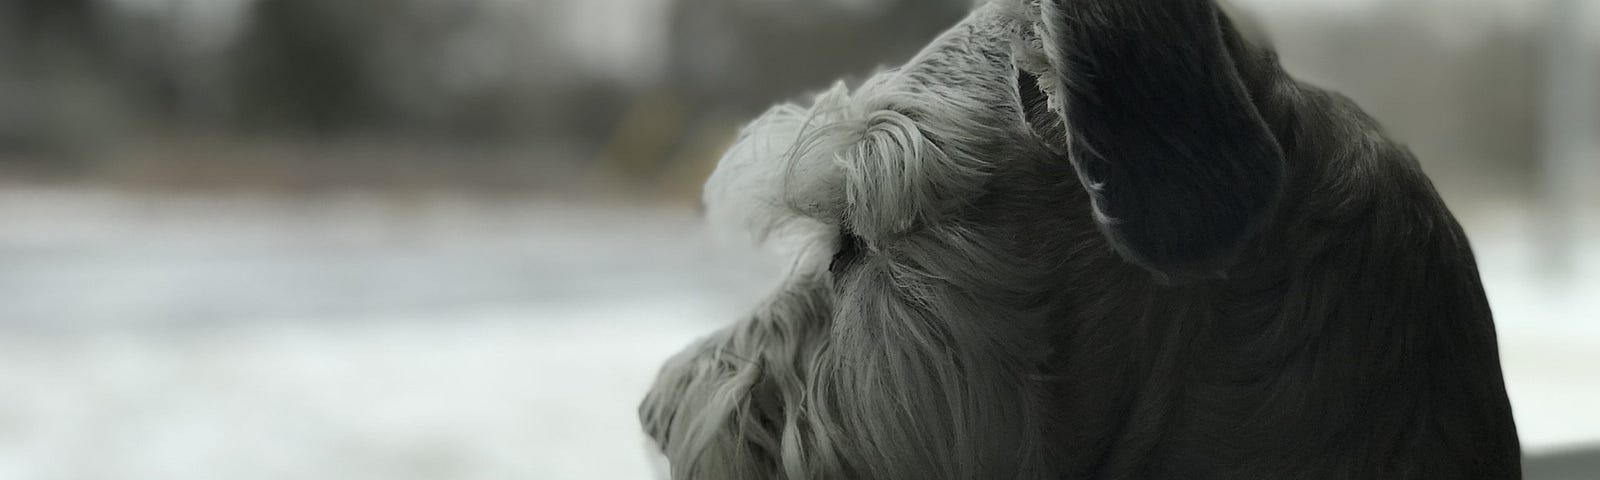 A small dog looking out the window of a house on a snowy day.